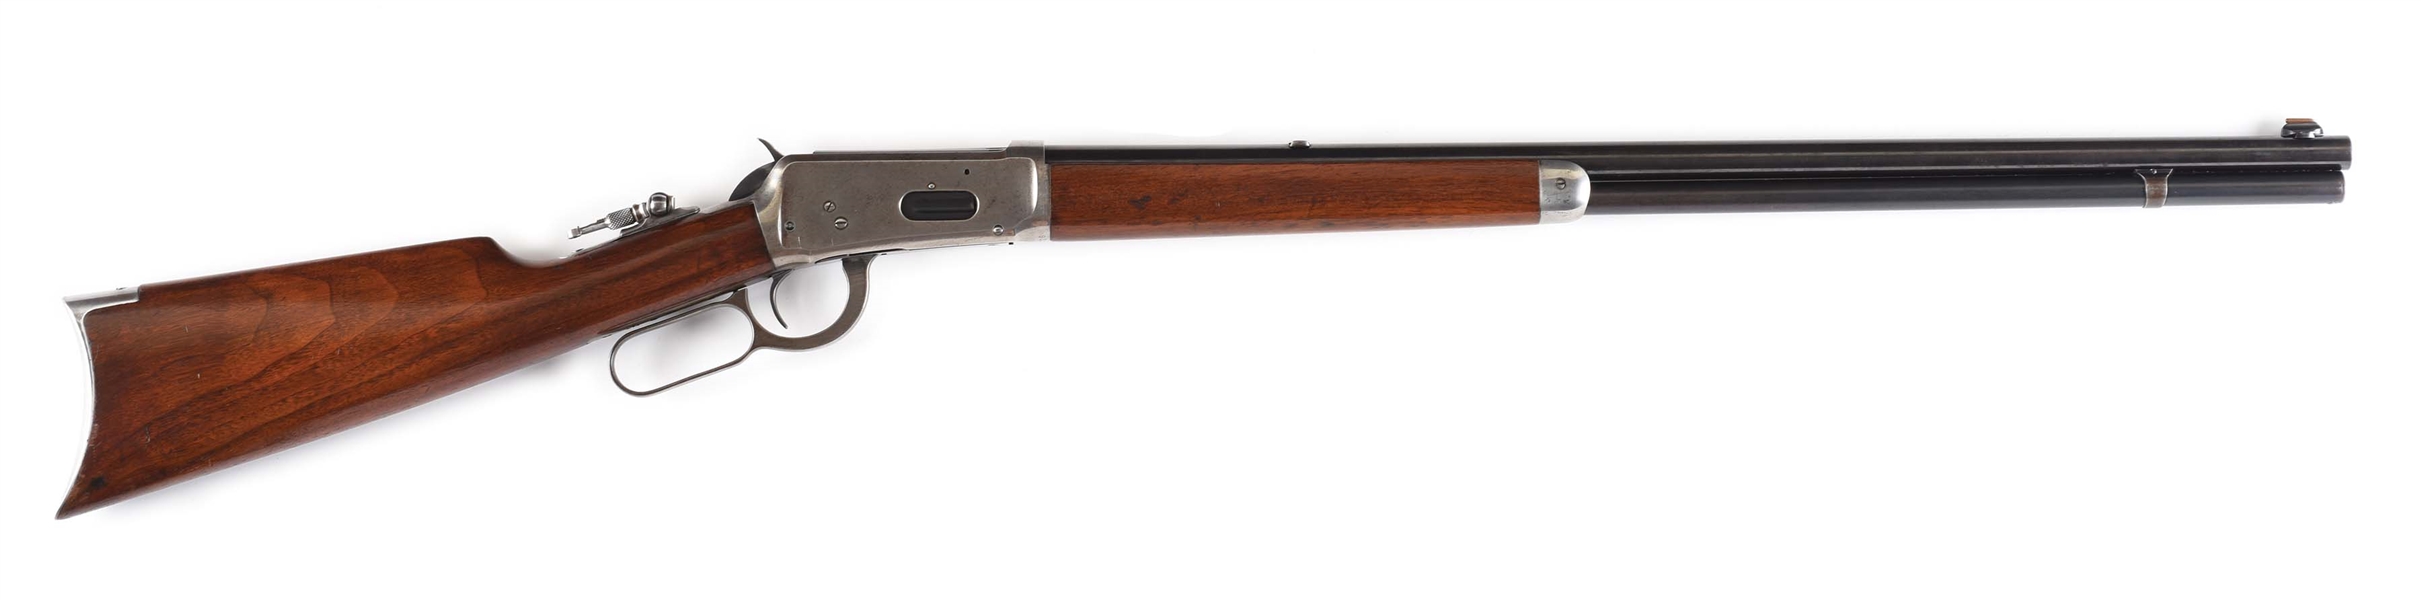 (C) WINCHESTER MODEL 1894 LEVER ACTION RIFLE (1921).